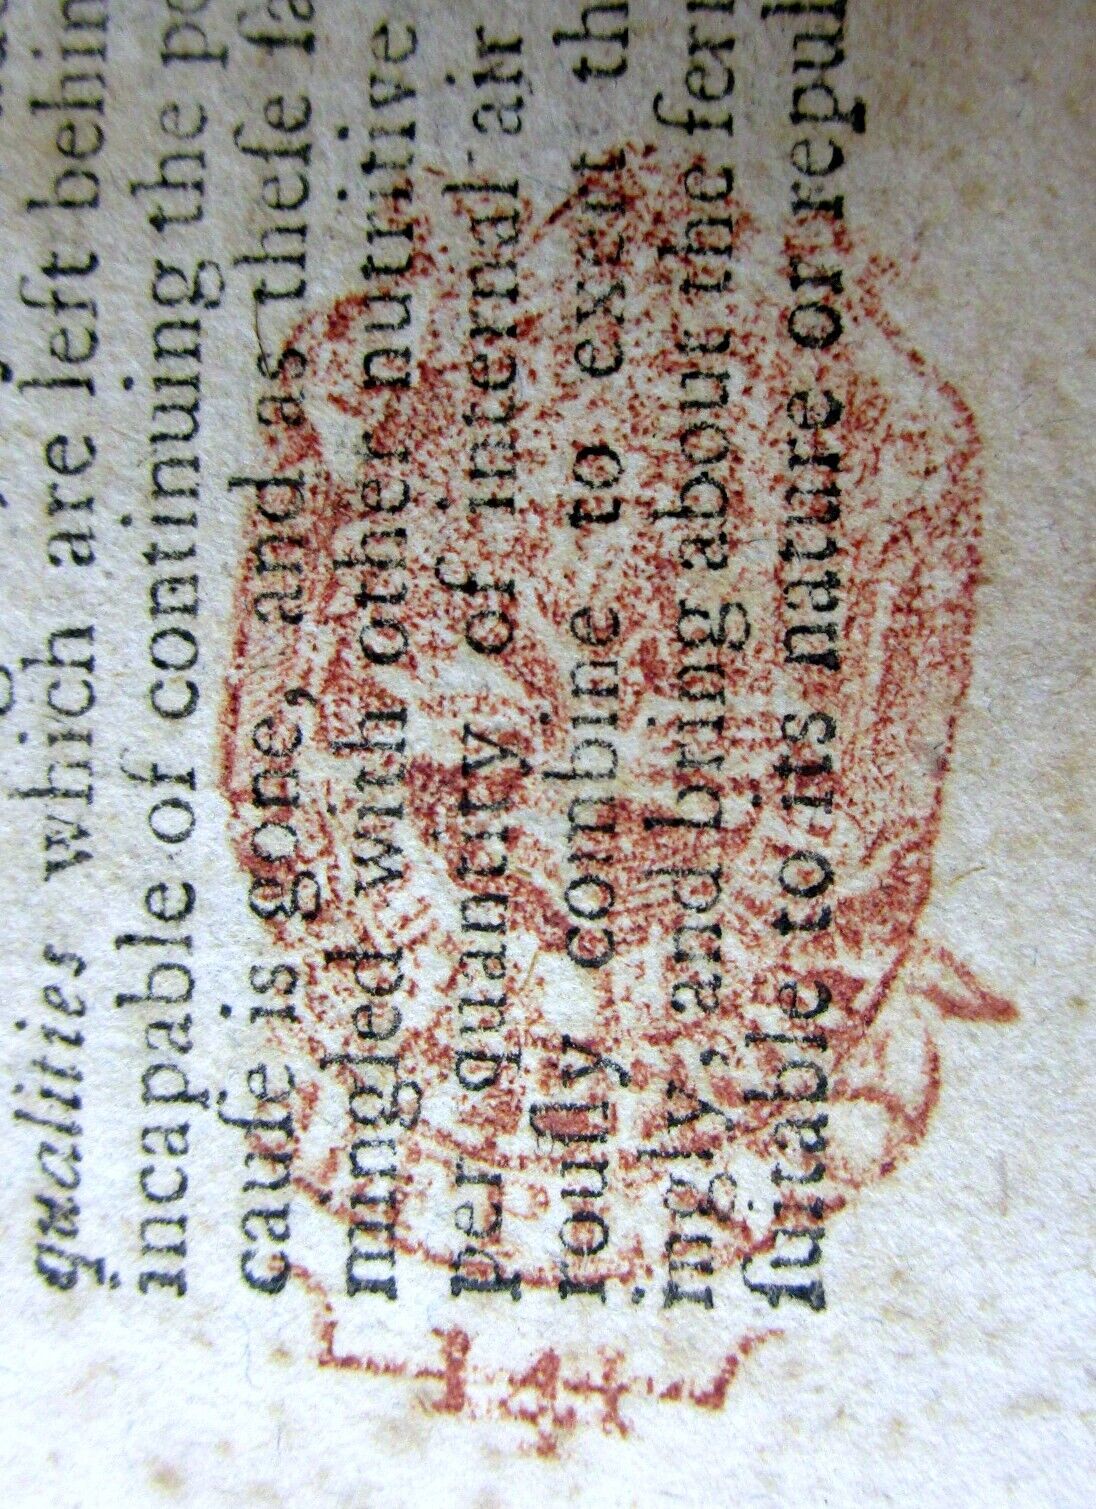 1758 French & Indian War era newspaper with a RED British halfpenny TAX STAMP